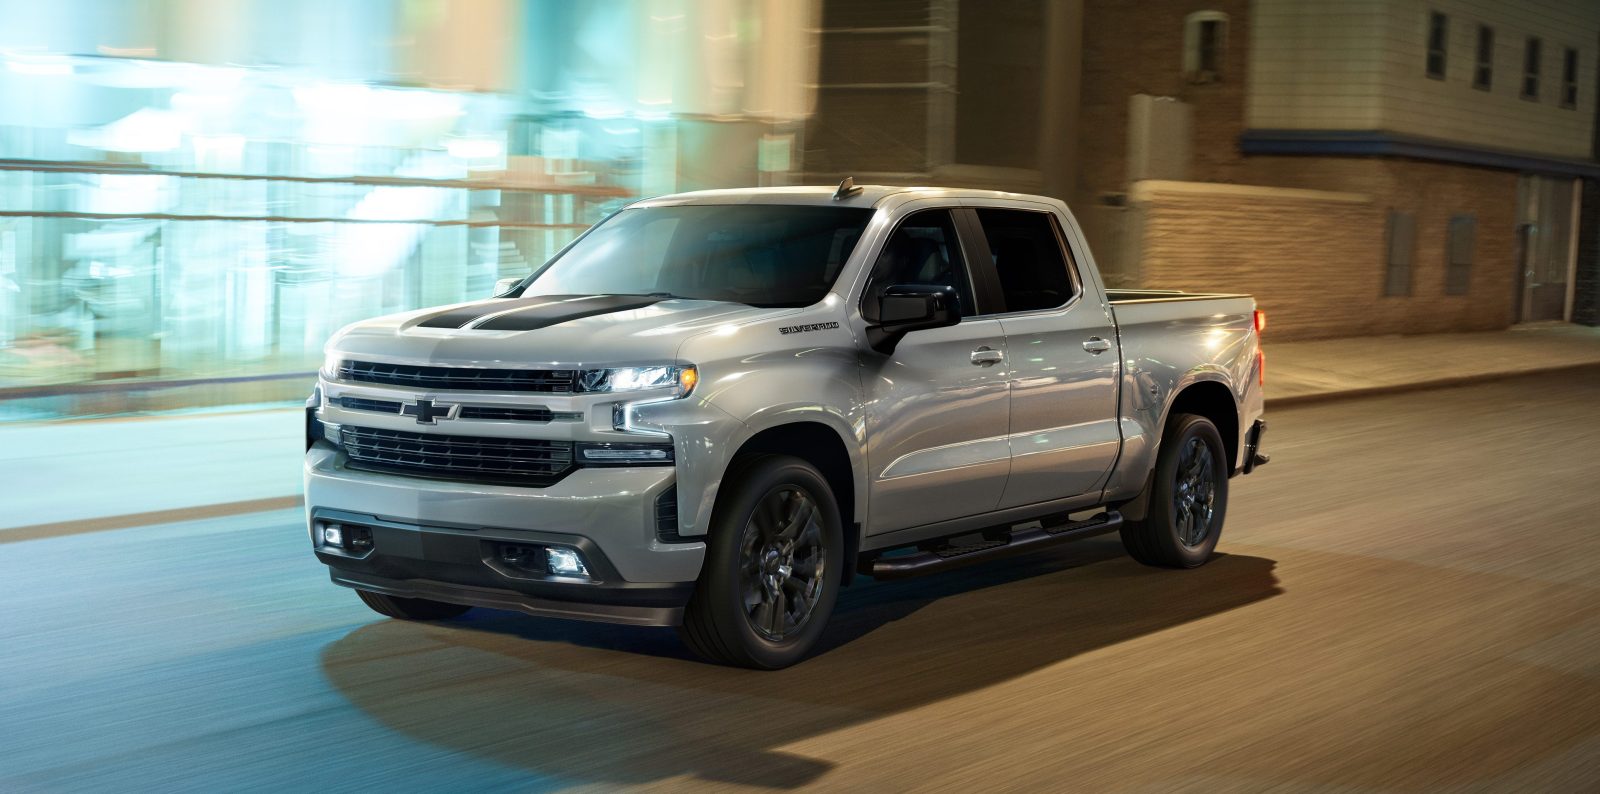 GM to build Chevrolet Silverado Electric Pickup with 400-mile range at